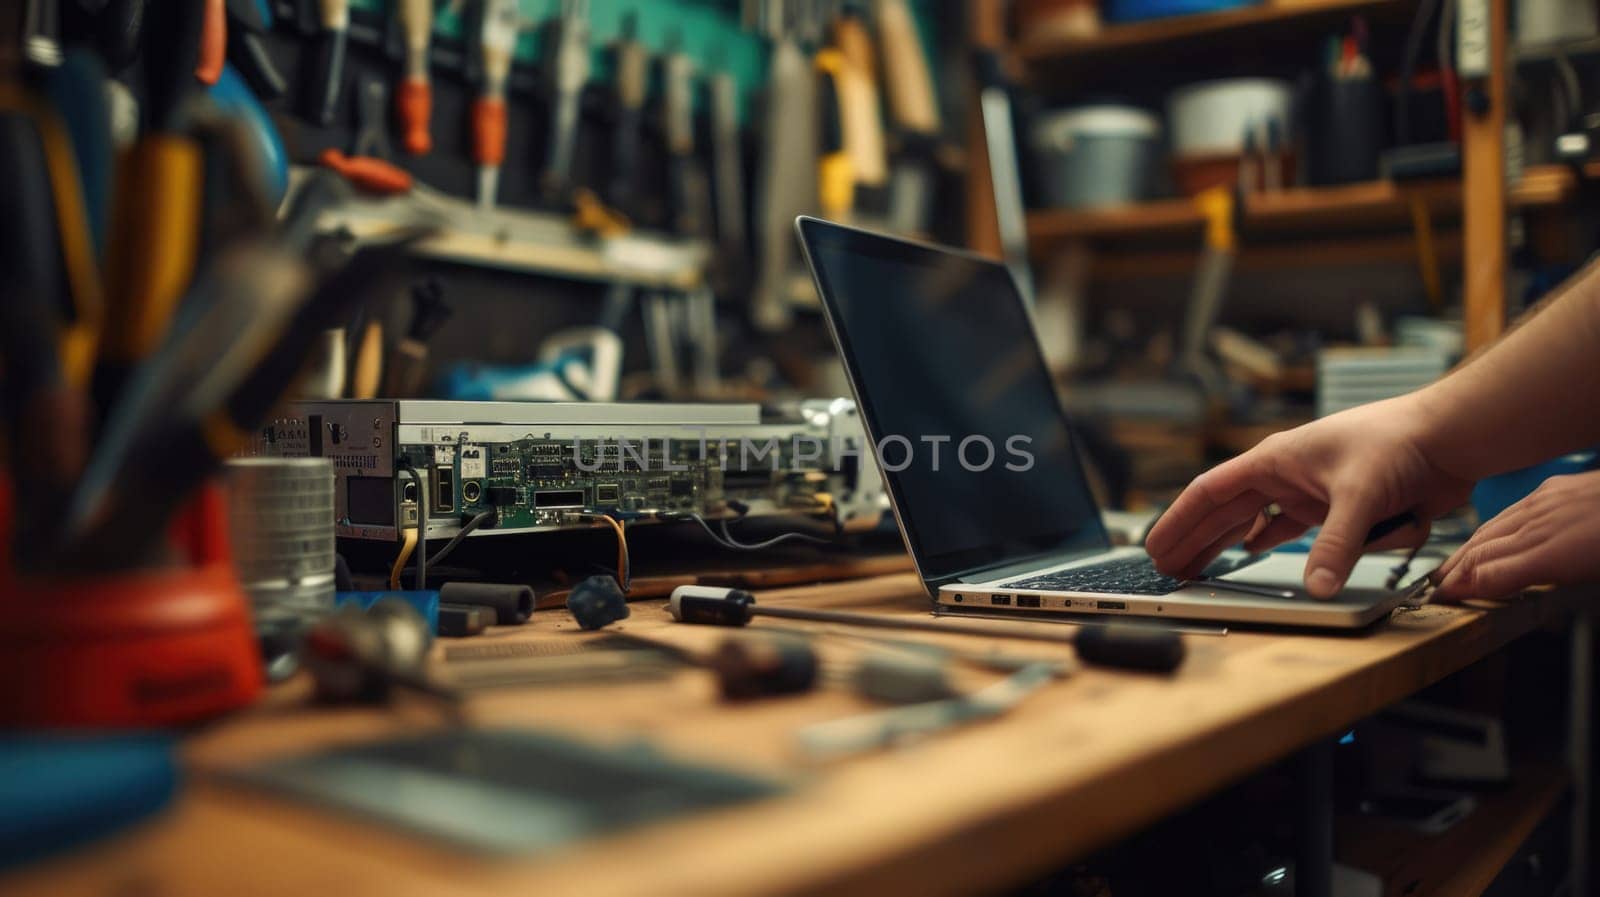 A man is working on a computer in a workshop AIG41 by biancoblue